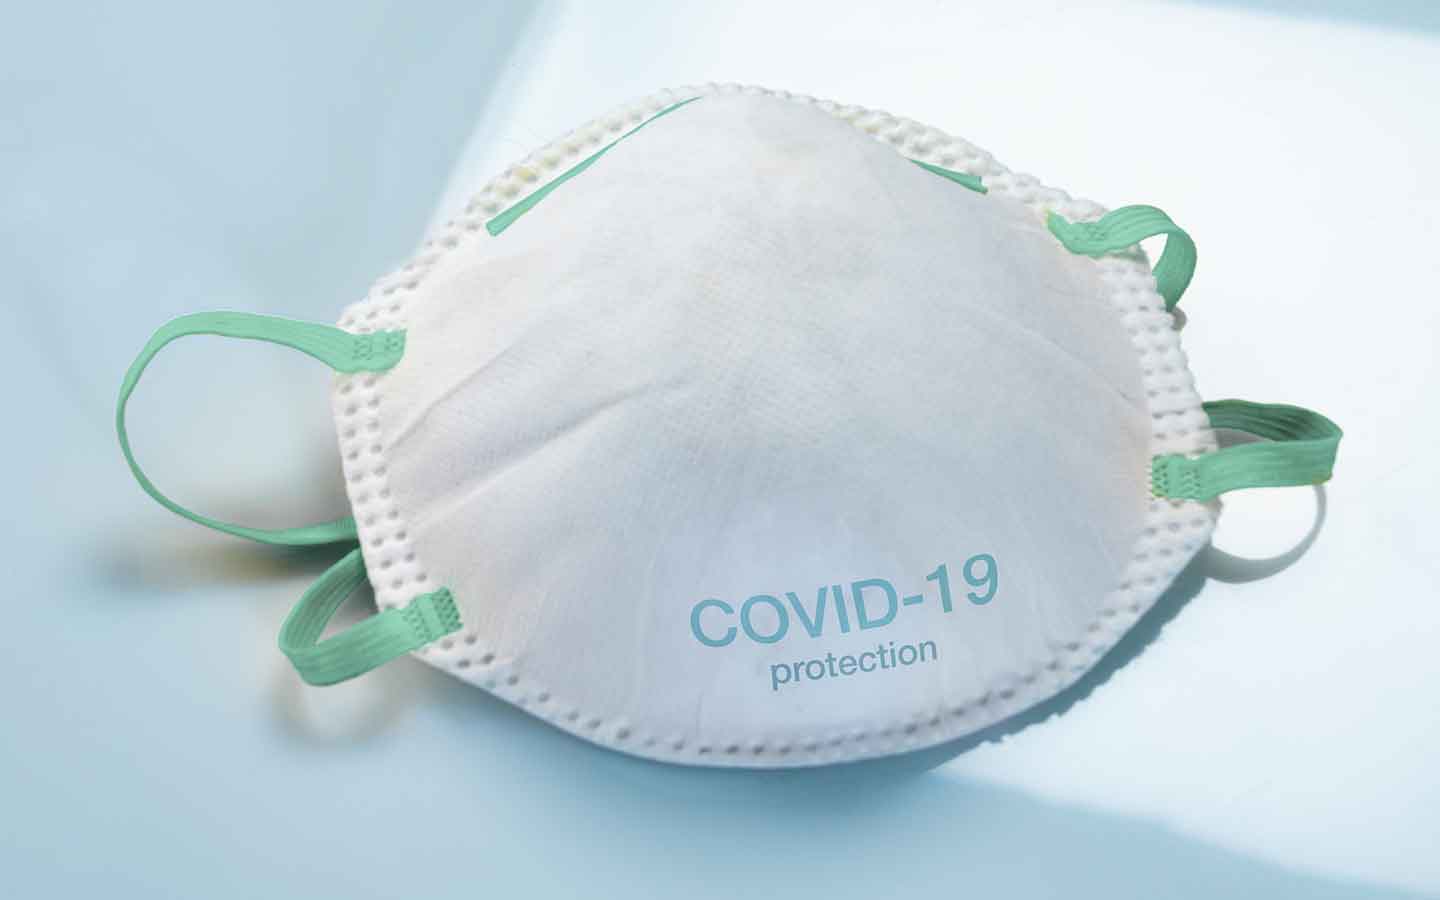 Face mask to protect against viral infections with COVID-19 protection printed on the bottom.